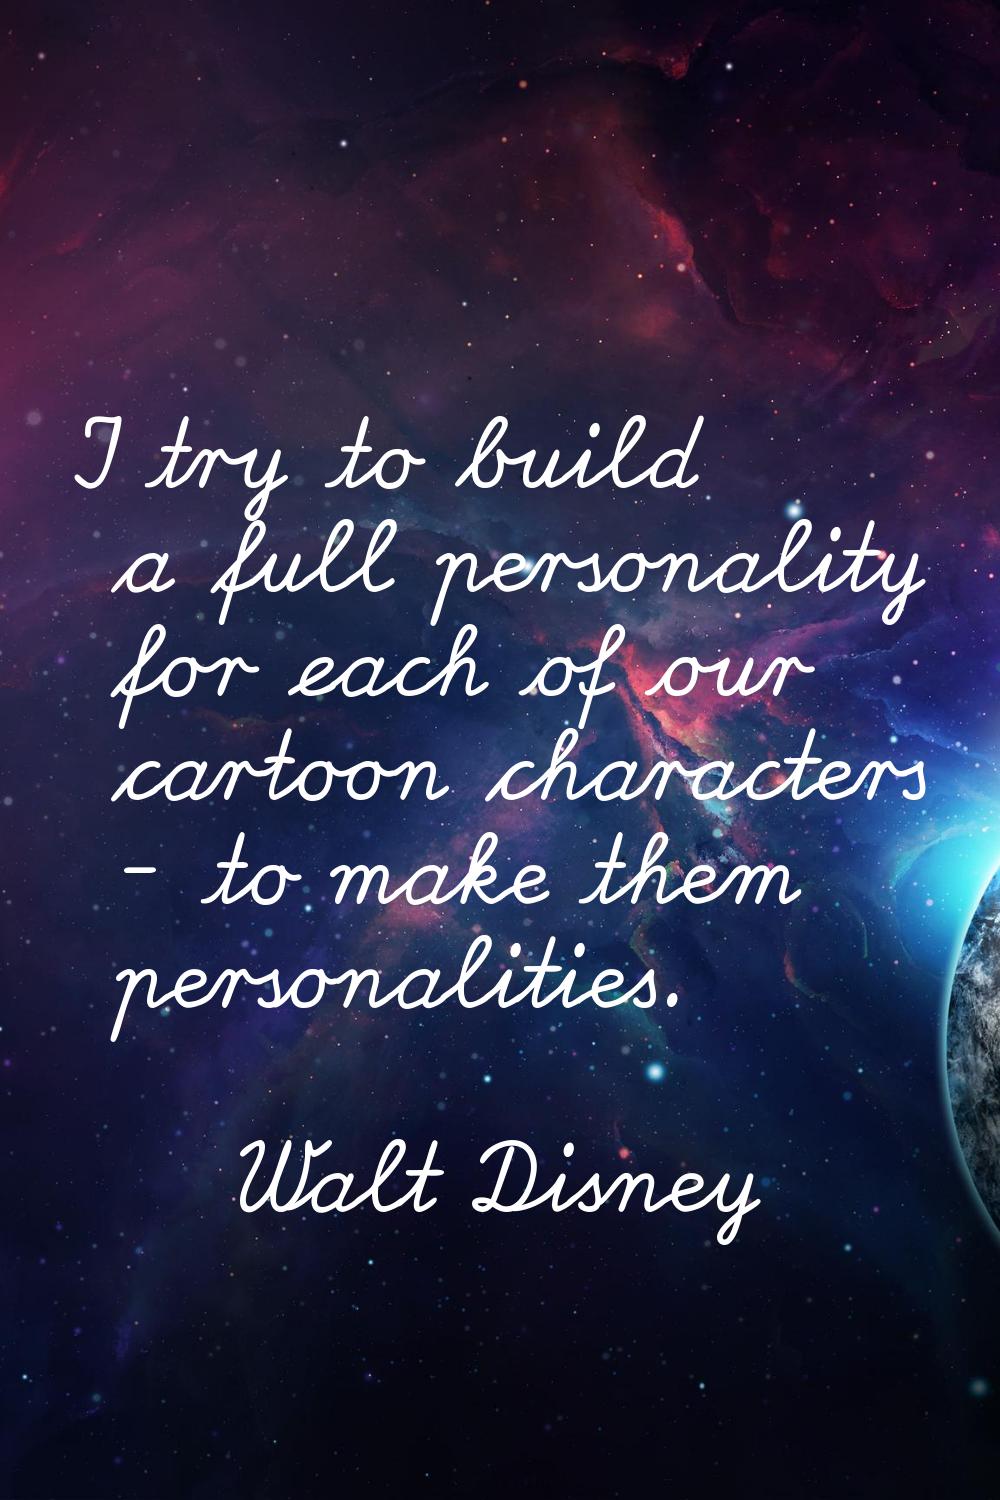 I try to build a full personality for each of our cartoon characters - to make them personalities.